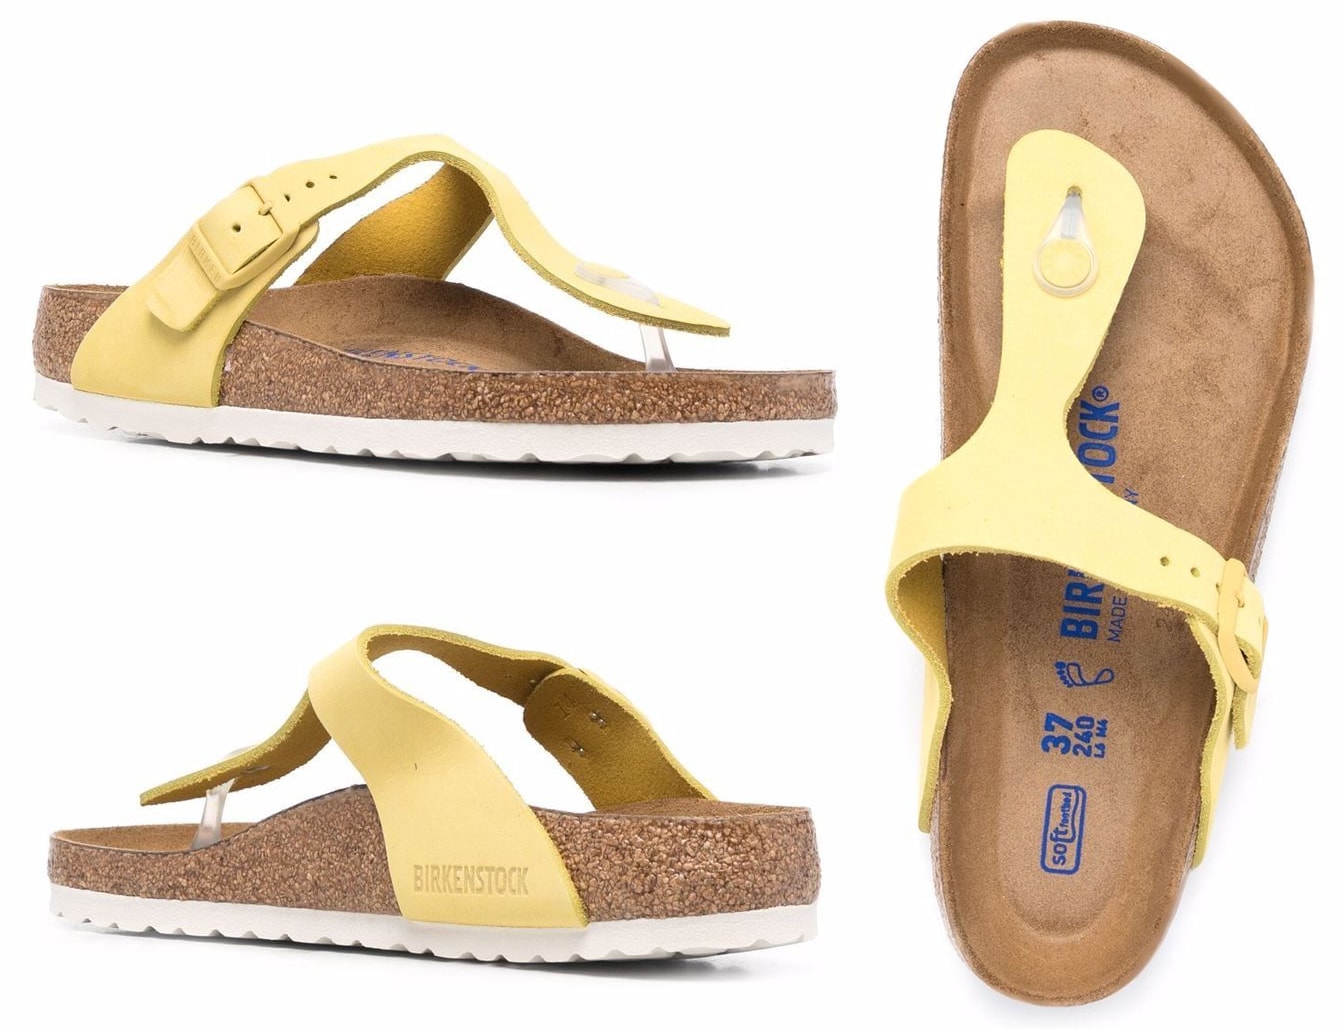 A comfy pair of thongs, the Gizeh boasts an additional foam layer and soft footbed for extra comfort